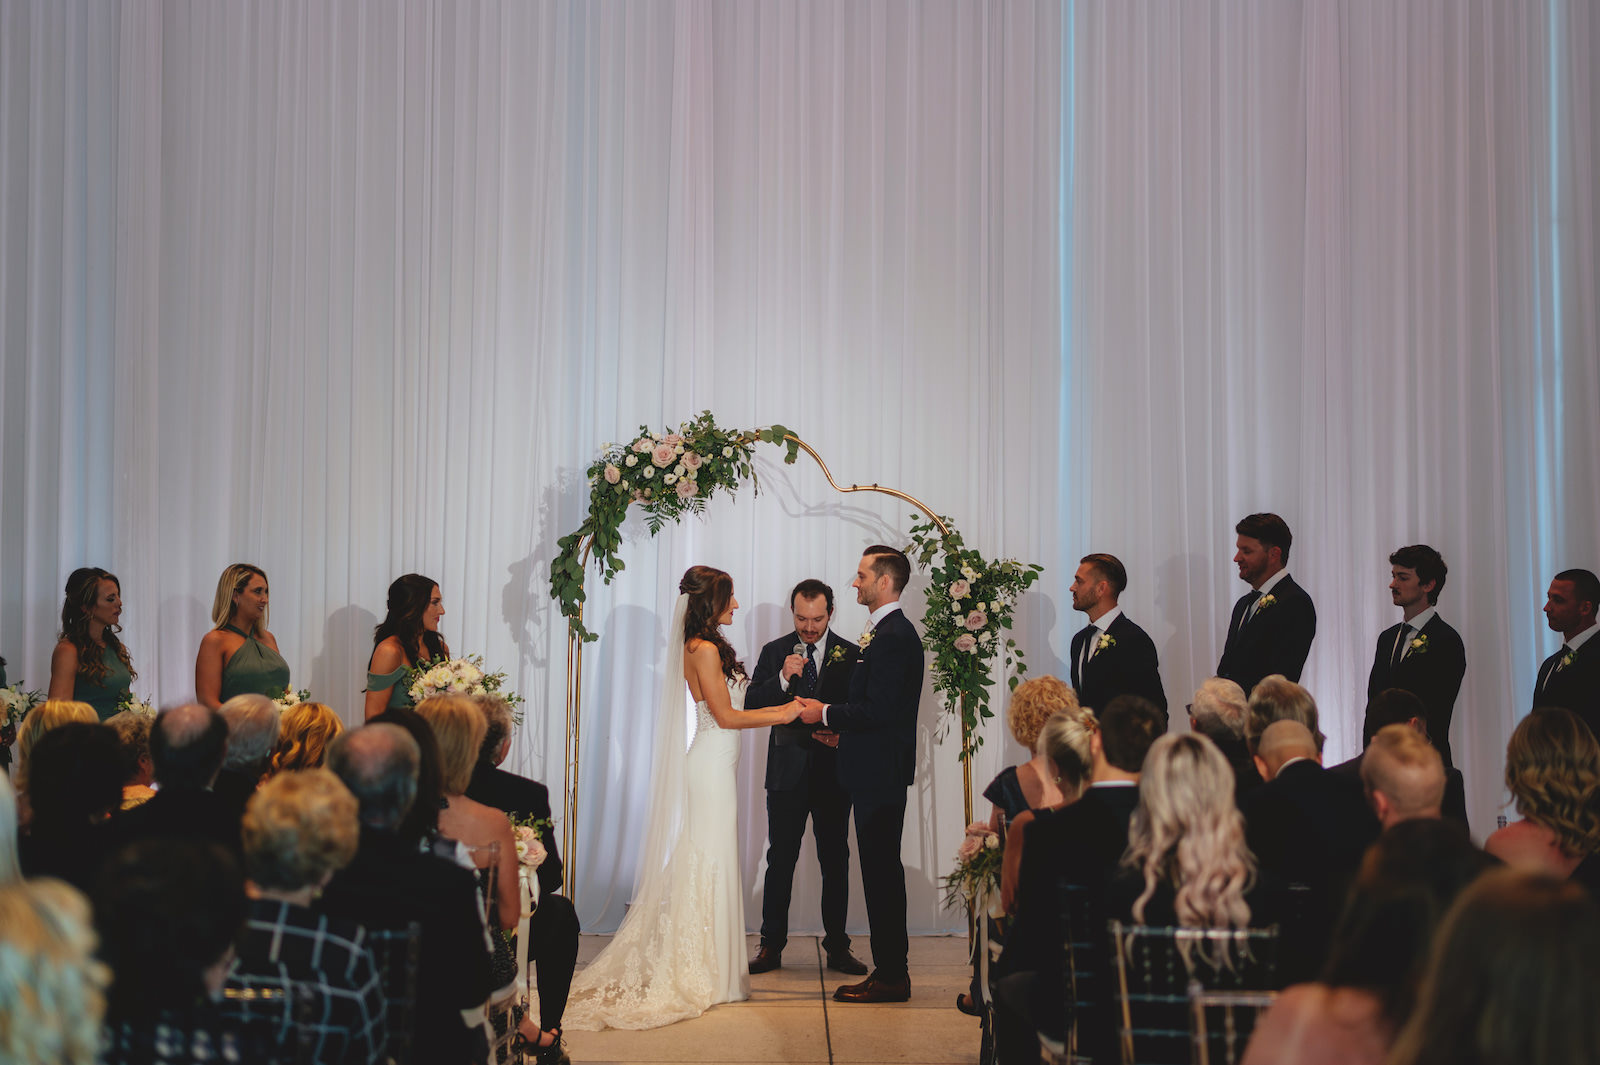 Modern Minimalist Bride and Groom Exchanging Wedding Vows During Ceremony, White Draping, Unique Arch with Lush Greenery and White, Blush Pink Roses Floral Arrangements